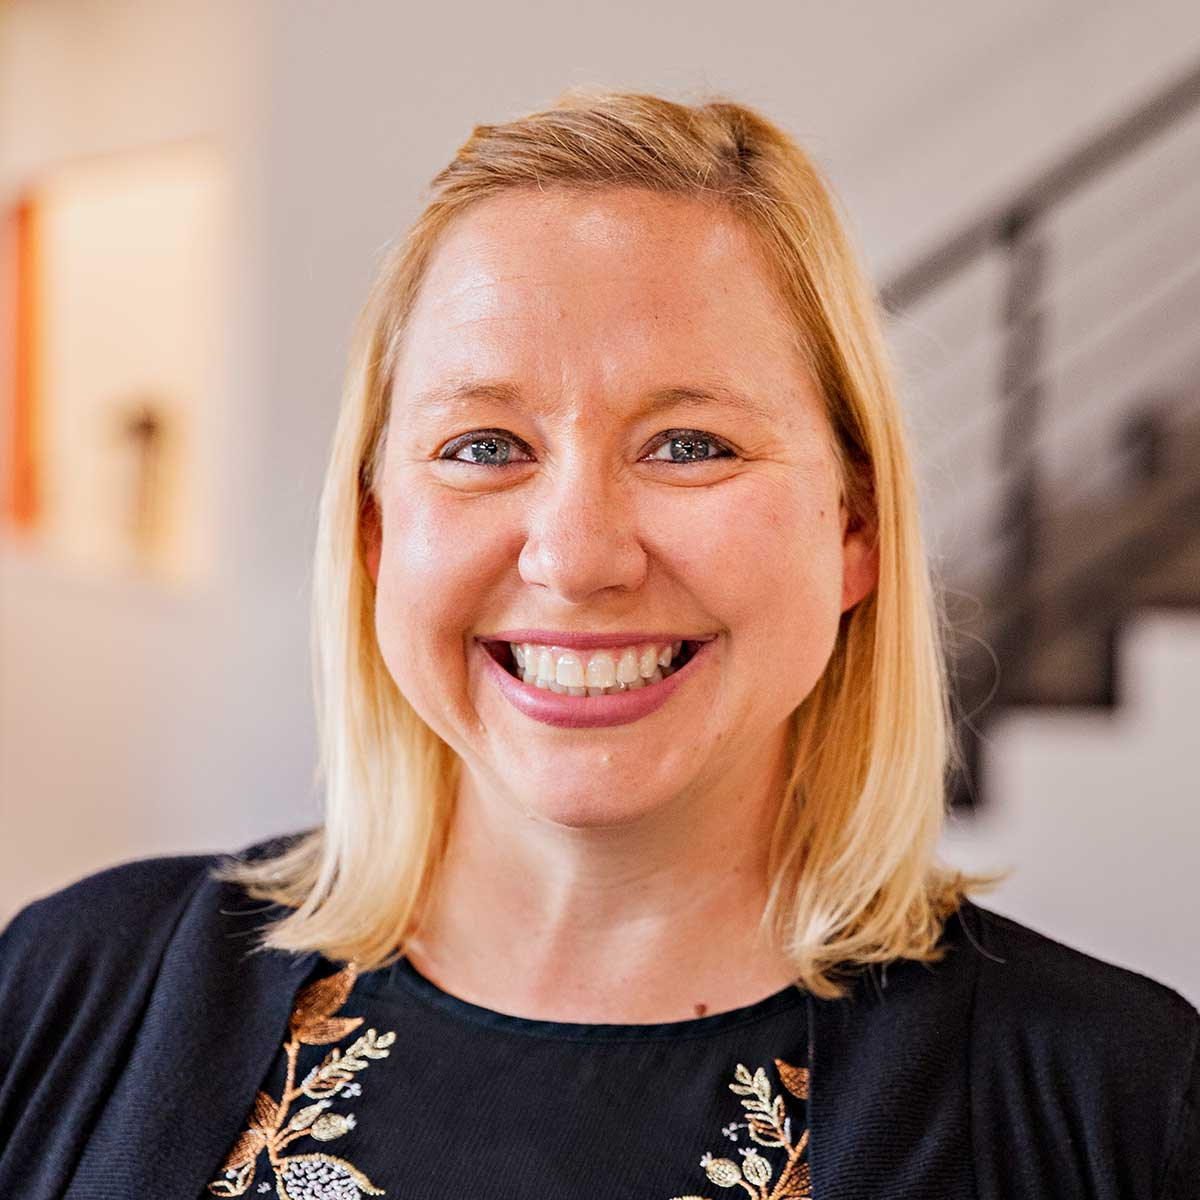 Erin Acuff, Senior Director of Client Services at Insight Creative Group